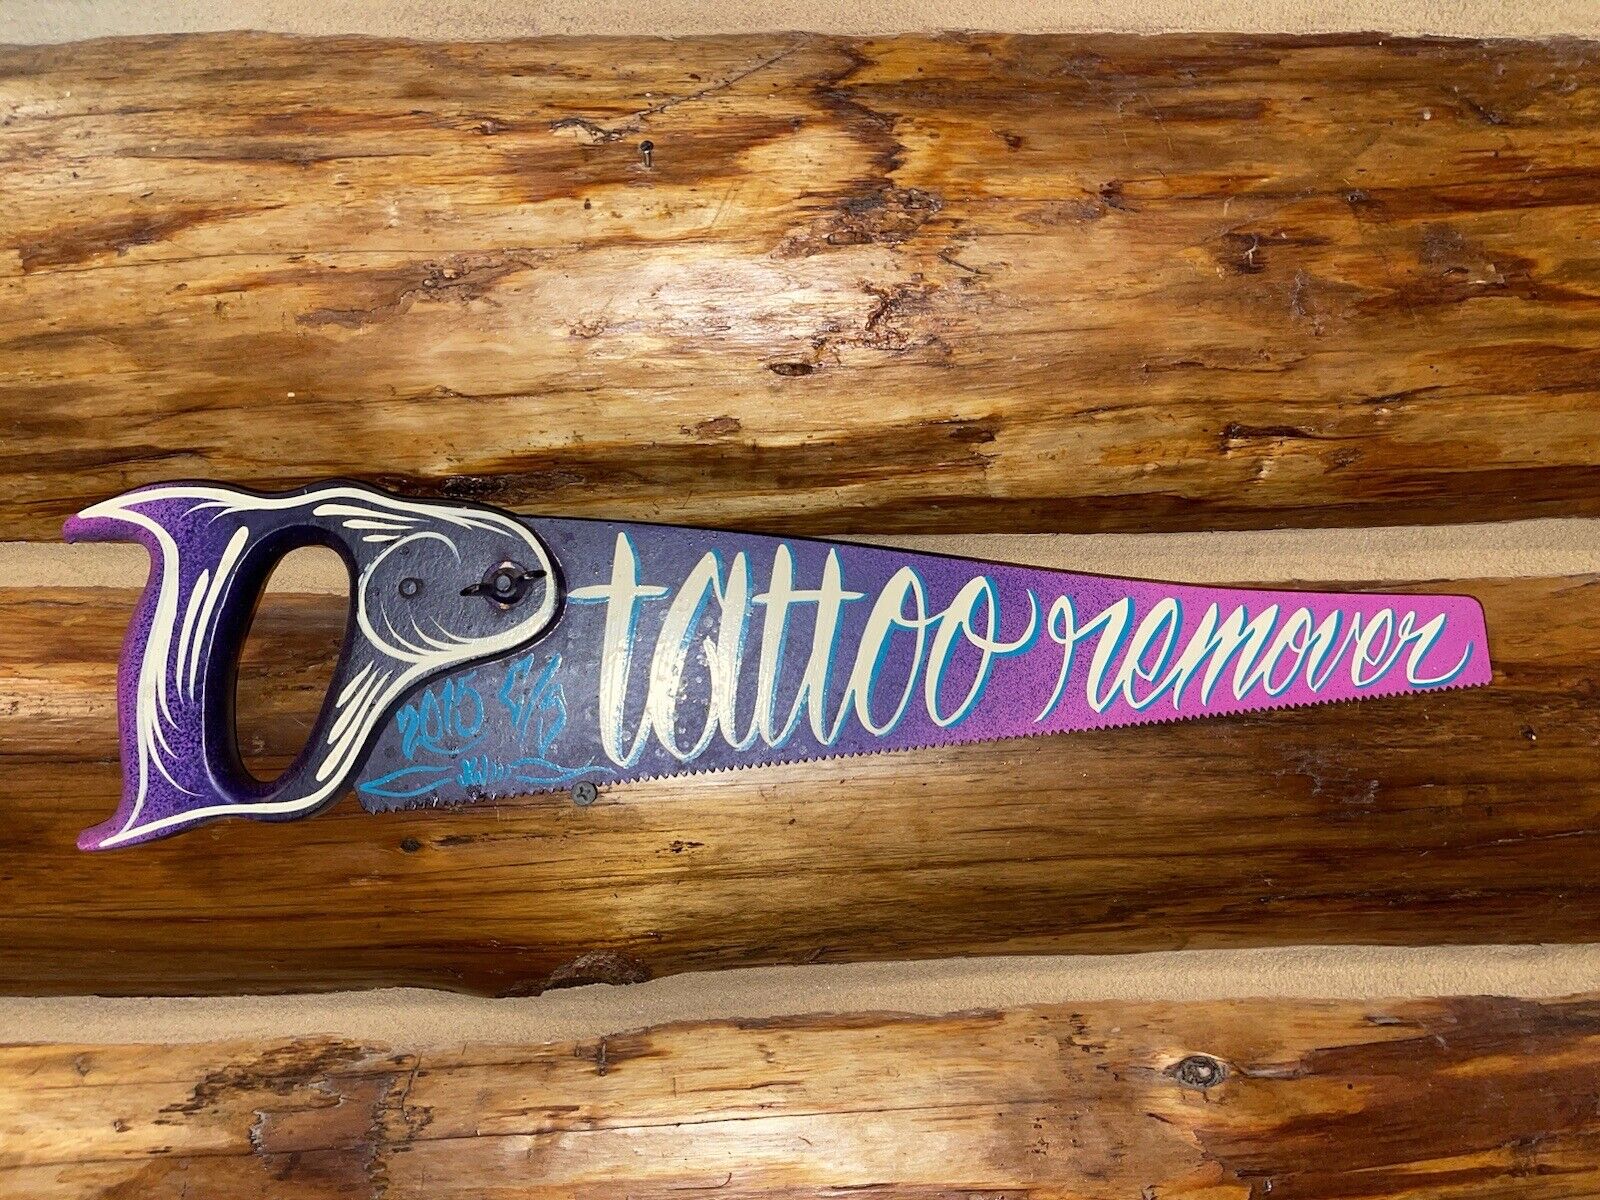 Tattoo Removal Saw - Hand Painted - 19”